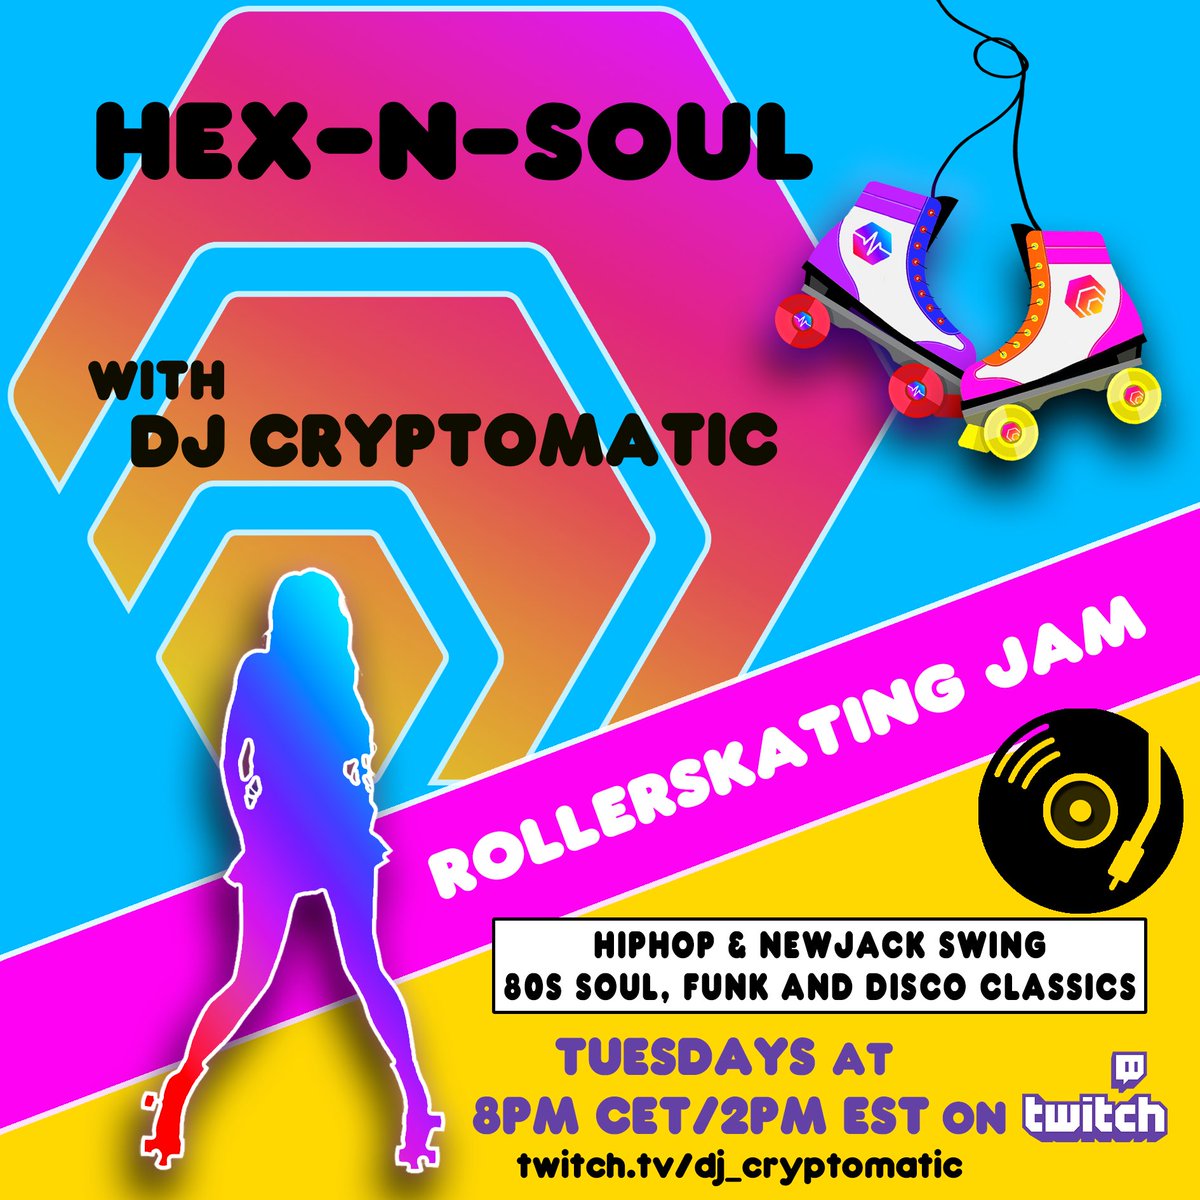 Last #HEX SoulSkate for 2023 live right now on #TwitchDE . Come and hang out ;)

twitch.tv/dj_cryptomatic

tonight: 80sRollerskating Disco Classics & HipHop vibes

#HEXICANS
#Pulsechain
#PulseX
#LetsGrowStreamers
@TwitchSIE